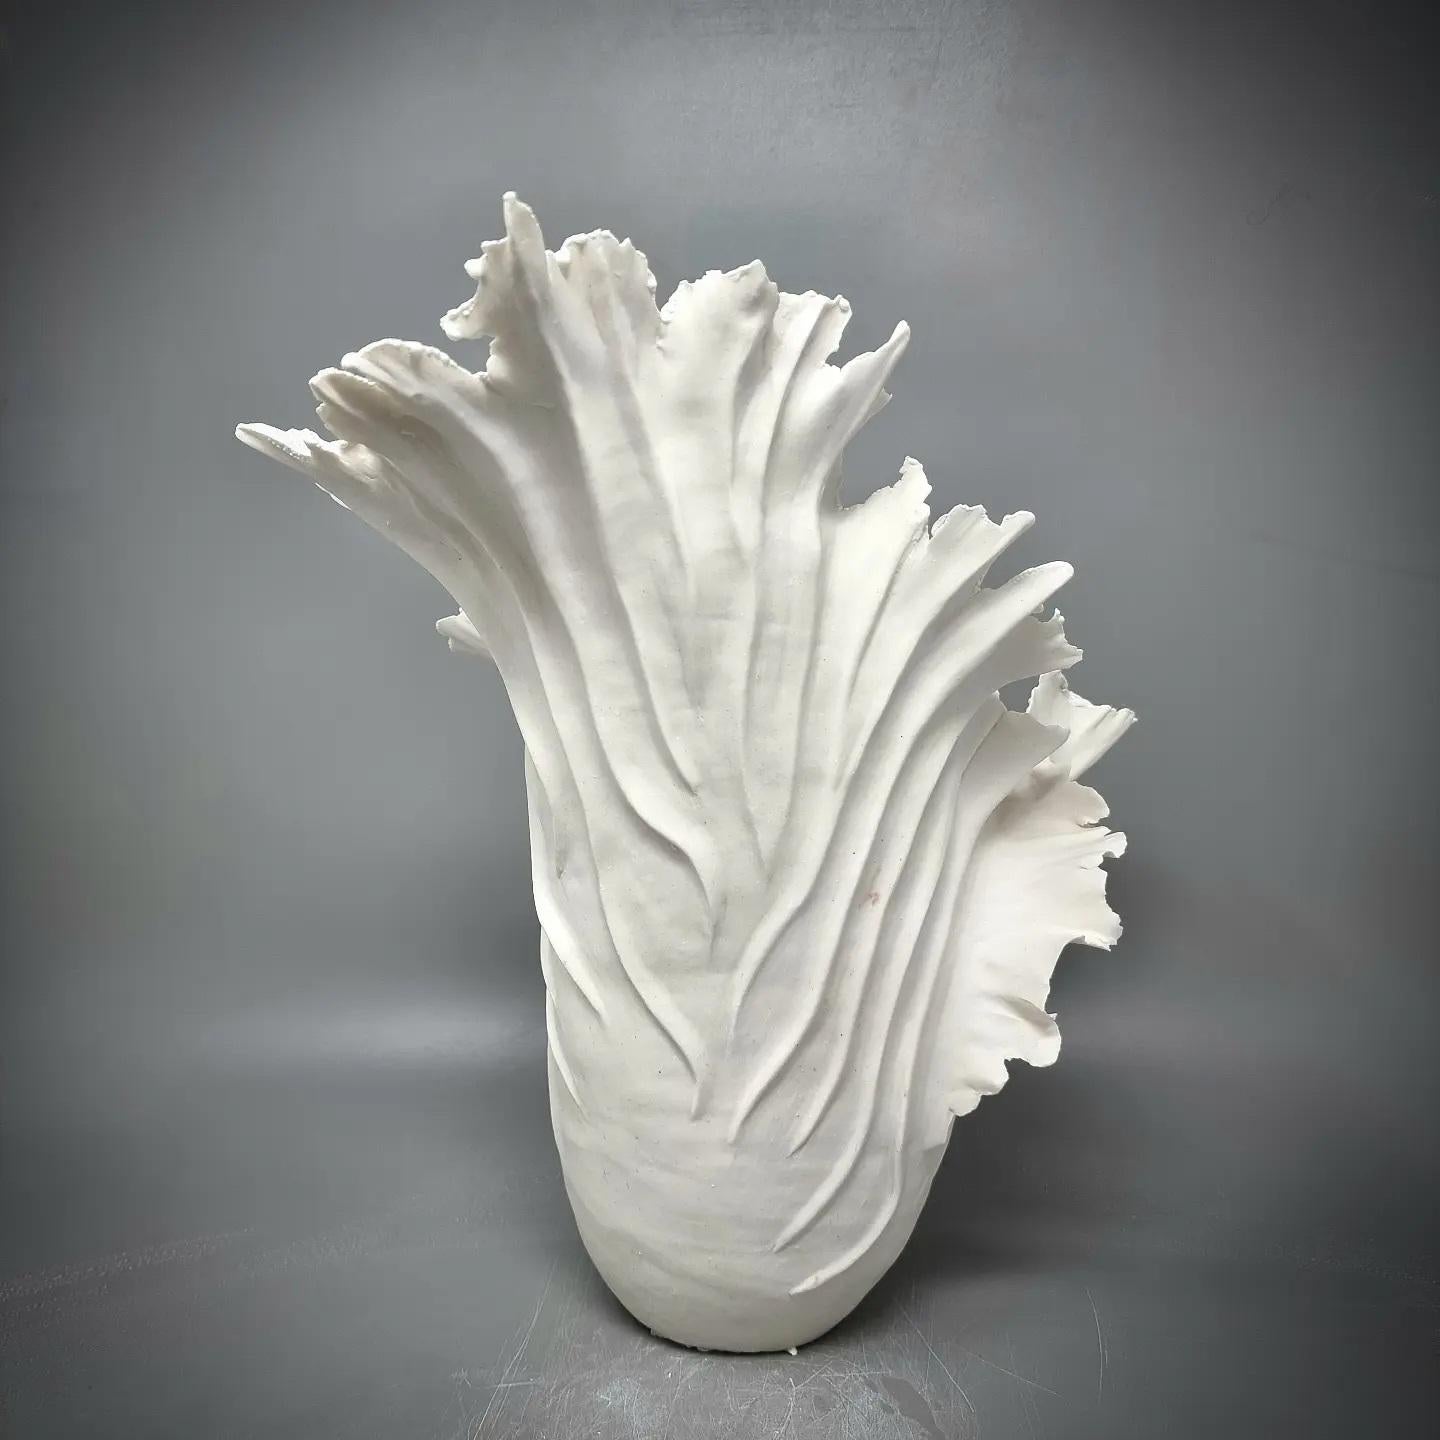 Handbuilt Stonewear Sculpture in paper porcelain. 

The inside is glazed with white diamond glaze. 

It is sculpted by hand, slowly adding coils and clay to create the final result. This is a piece of art based on classic sculpting methods.